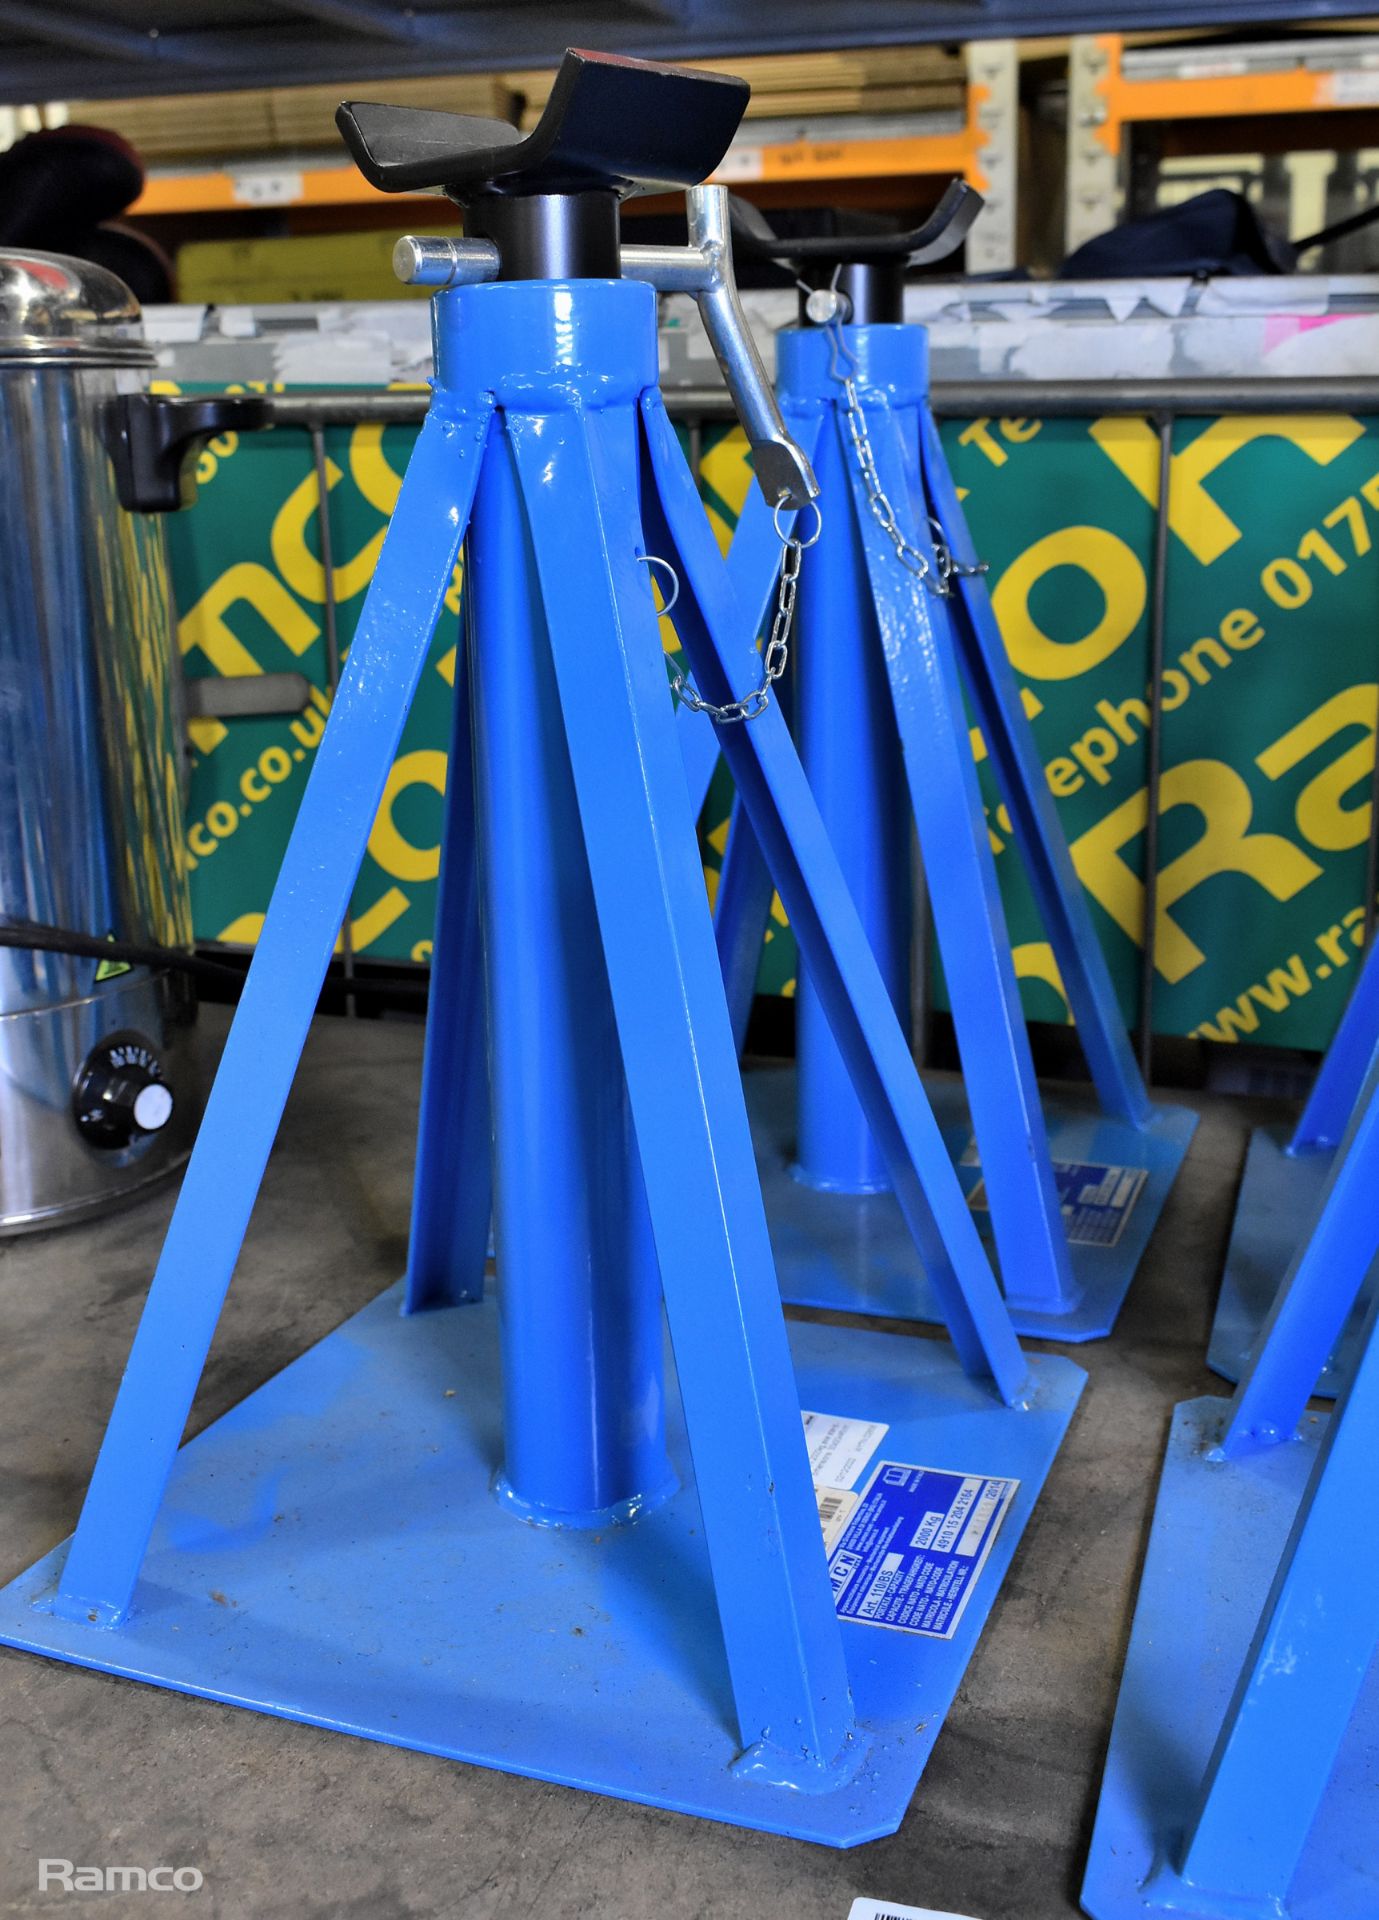 4x OMCN 2000 kg axle stands - dimensions: 30x30x46cm - Image 2 of 4